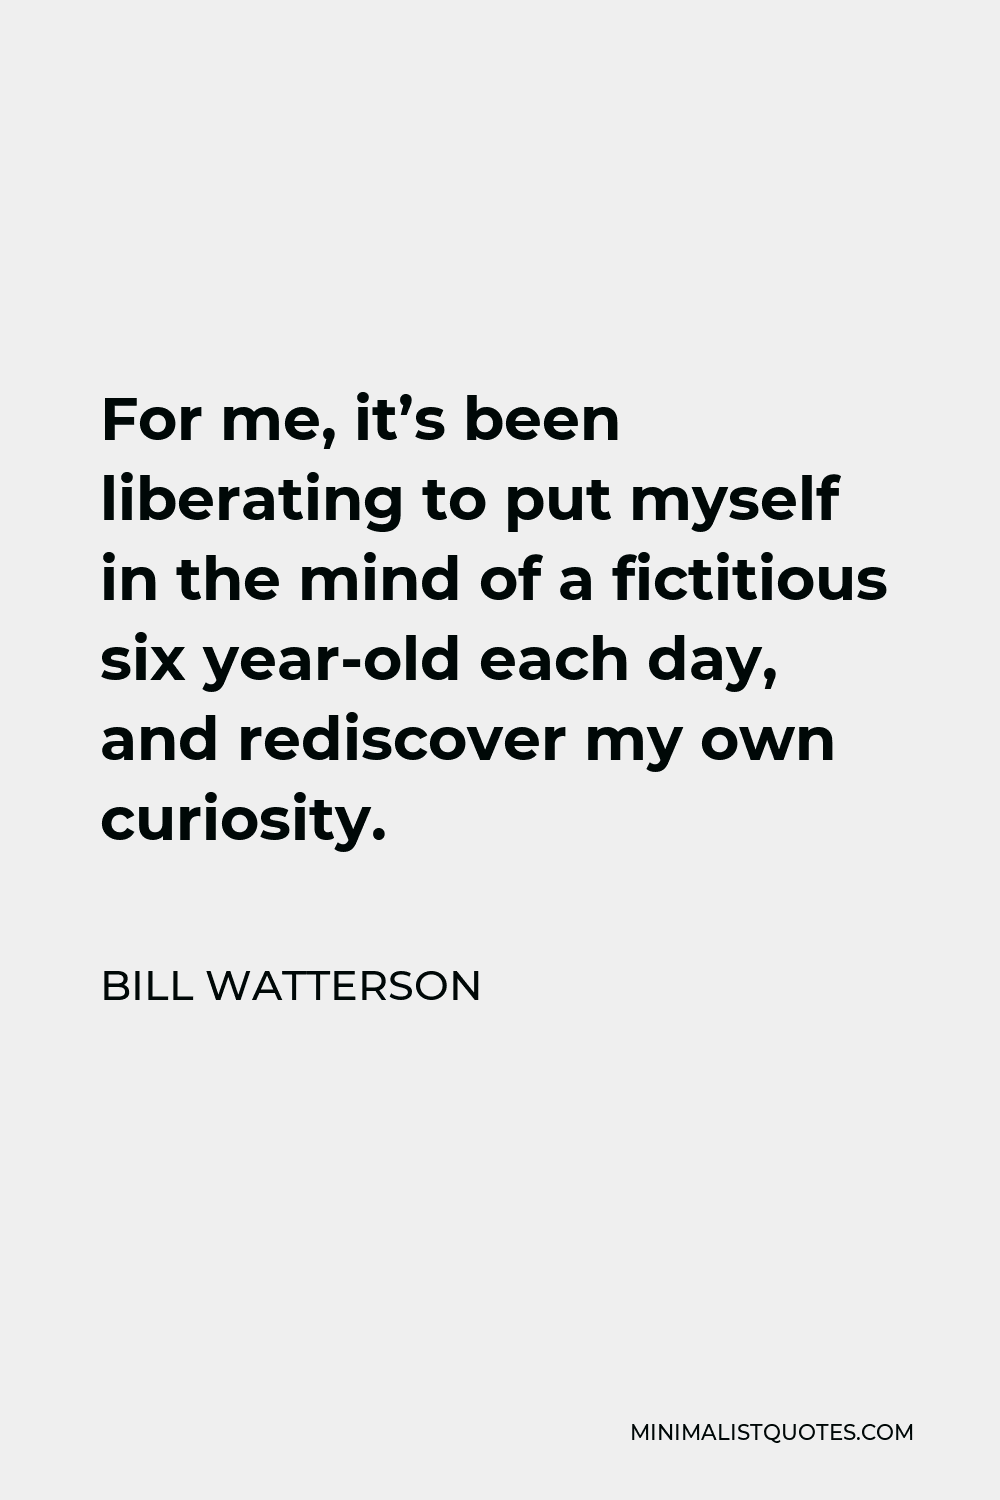 Bill Watterson Quote - For me, it’s been liberating to put myself in the mind of a fictitious six year-old each day, and rediscover my own curiosity.